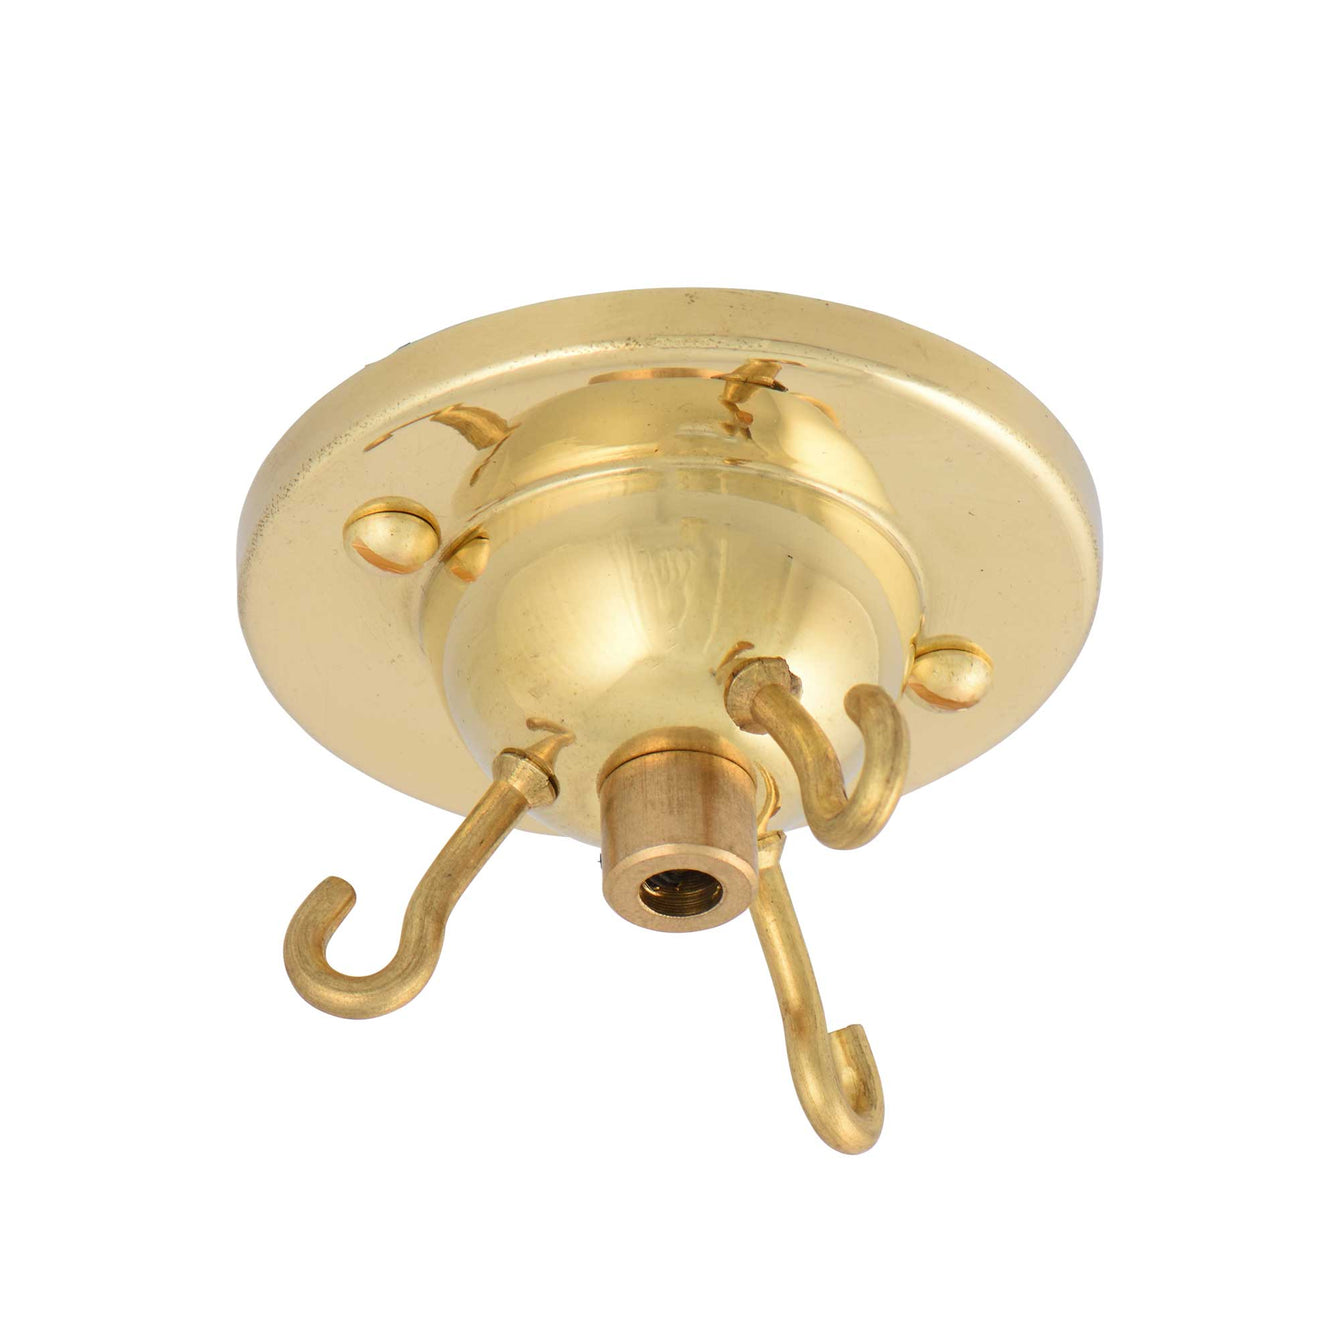 ElekTek 3 Hook Ceiling Rose With Matching Screws and Cord Grip Colours - Buy It Better Antique Brass